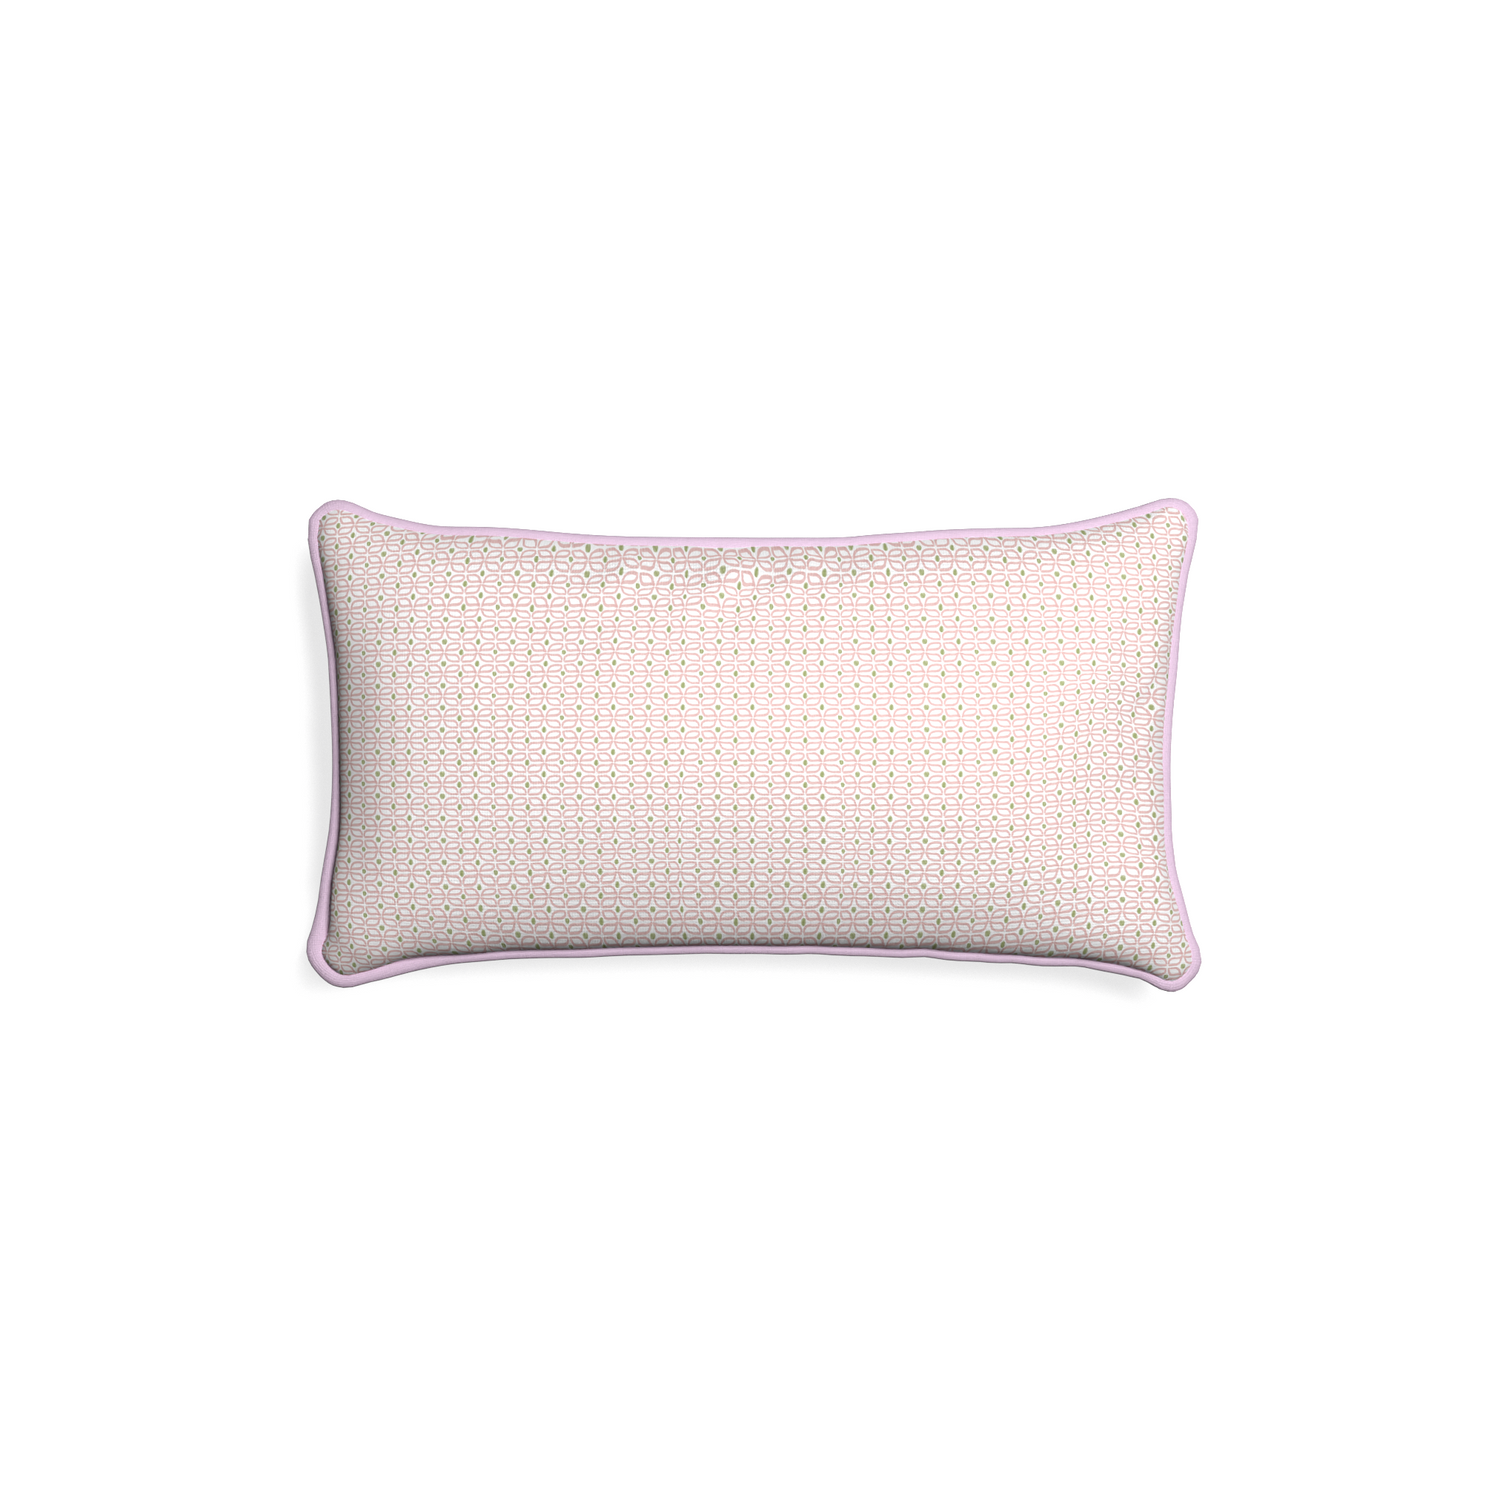 Petite-lumbar loomi pink custom pink geometricpillow with l piping on white background